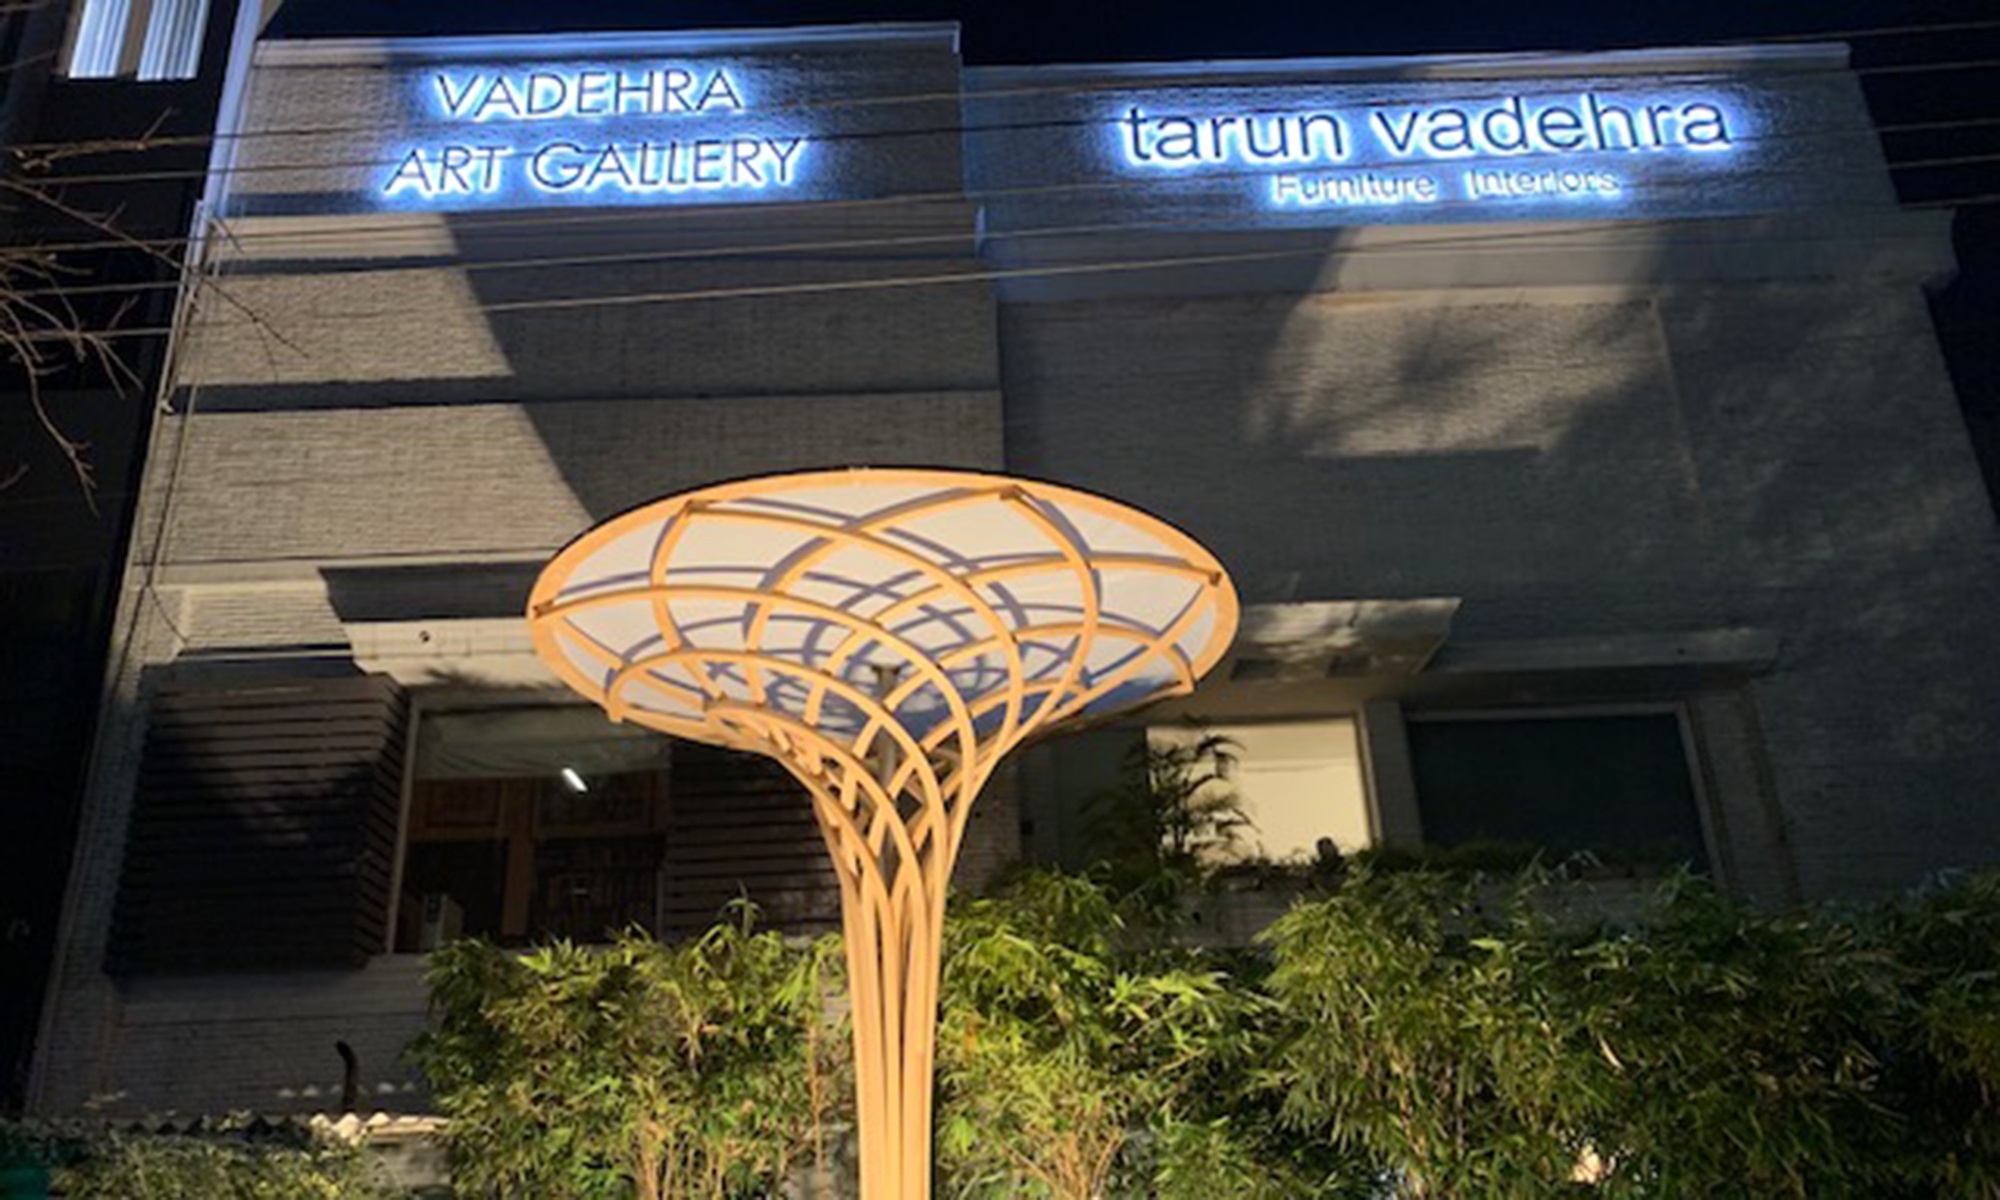 A free-formed wooden sculpture in the shape of a flower stands outside the Vadehra Art Gallery in Delhi. It is night and the free-form tree is illuminated.